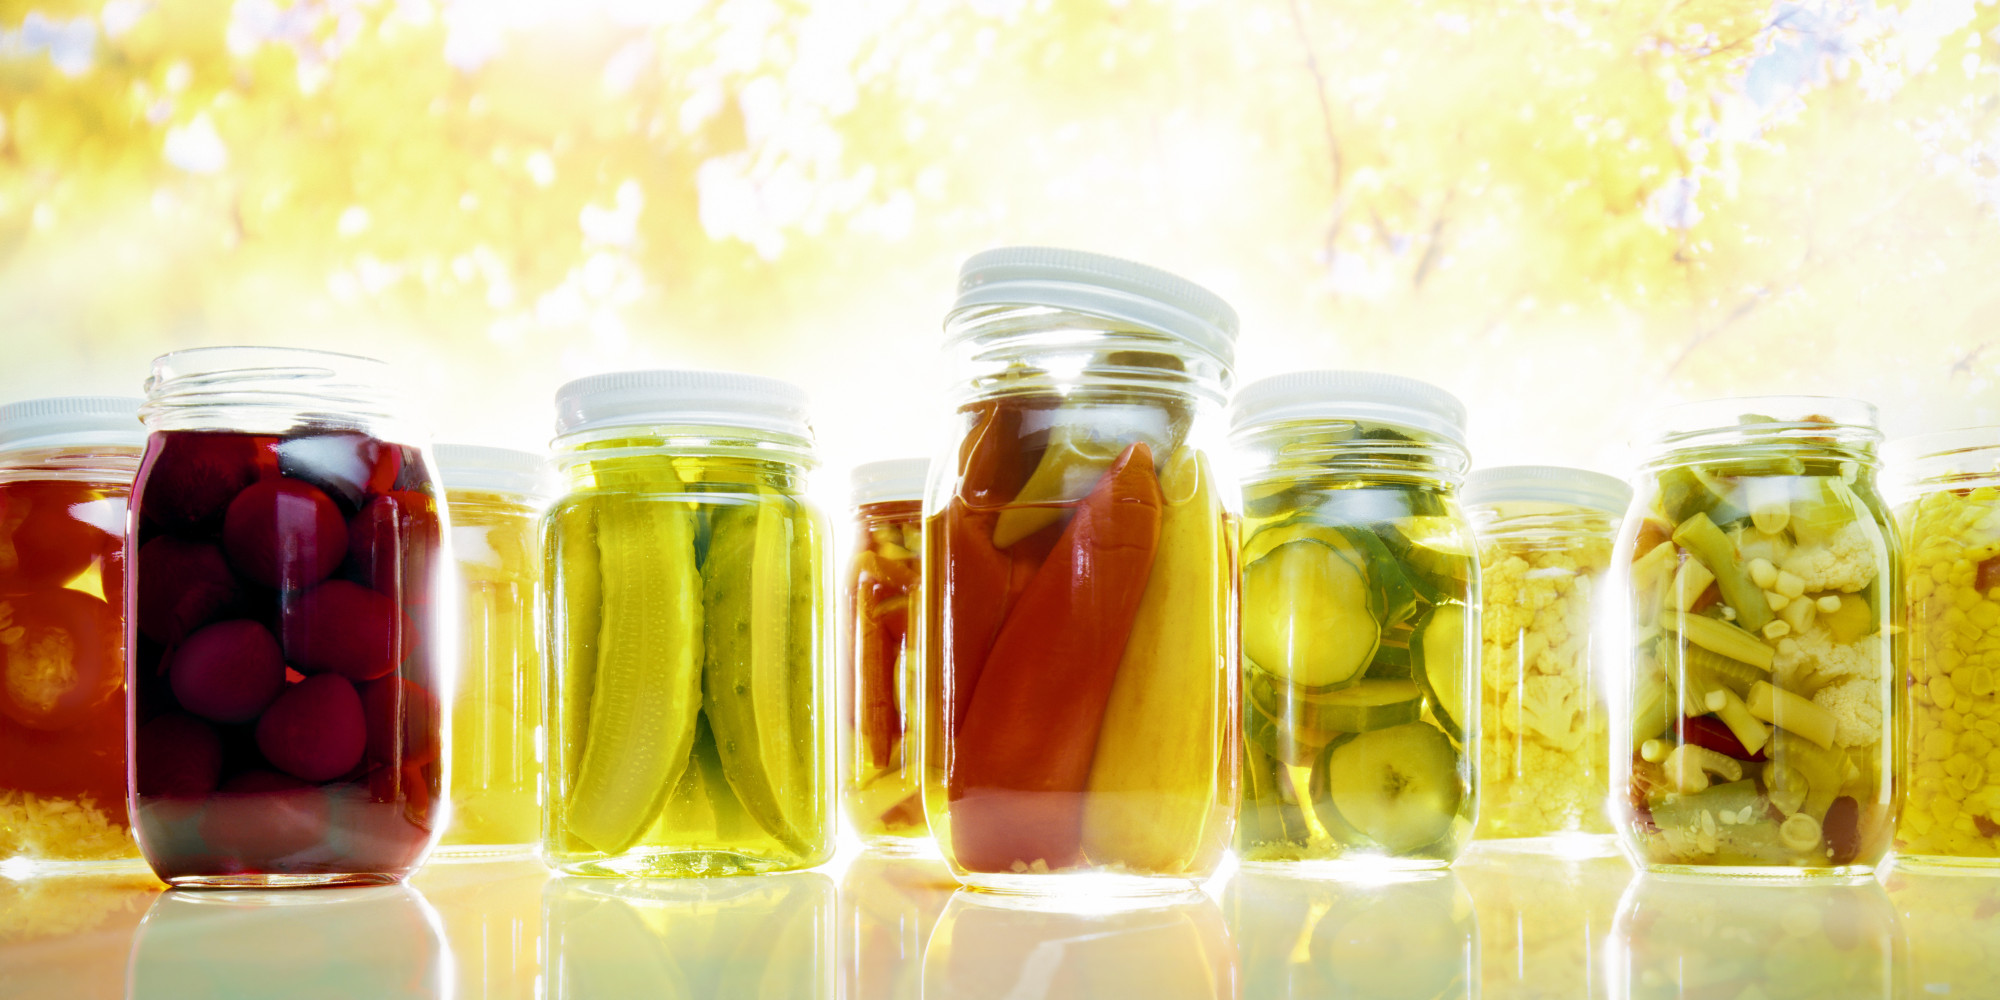 Don't Be Scared, It's Just Pickling: How To Pickle Anything, Stress